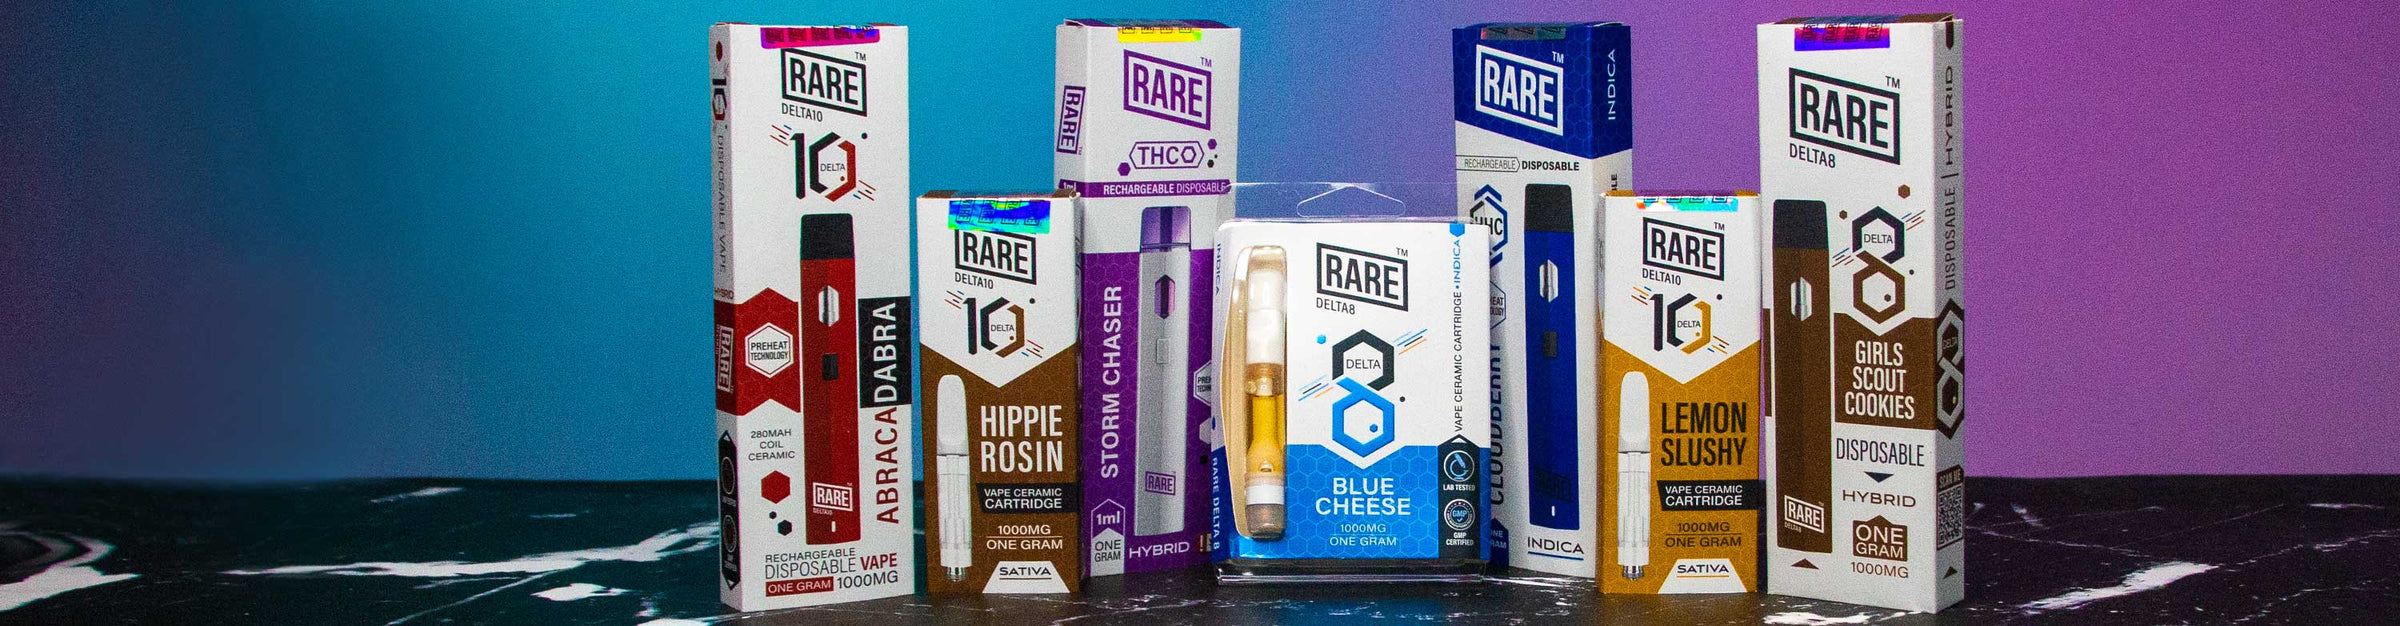 Rare Bar CBD Cartridges and Disposables standing on black marbled textured desk with blue and purple lighting